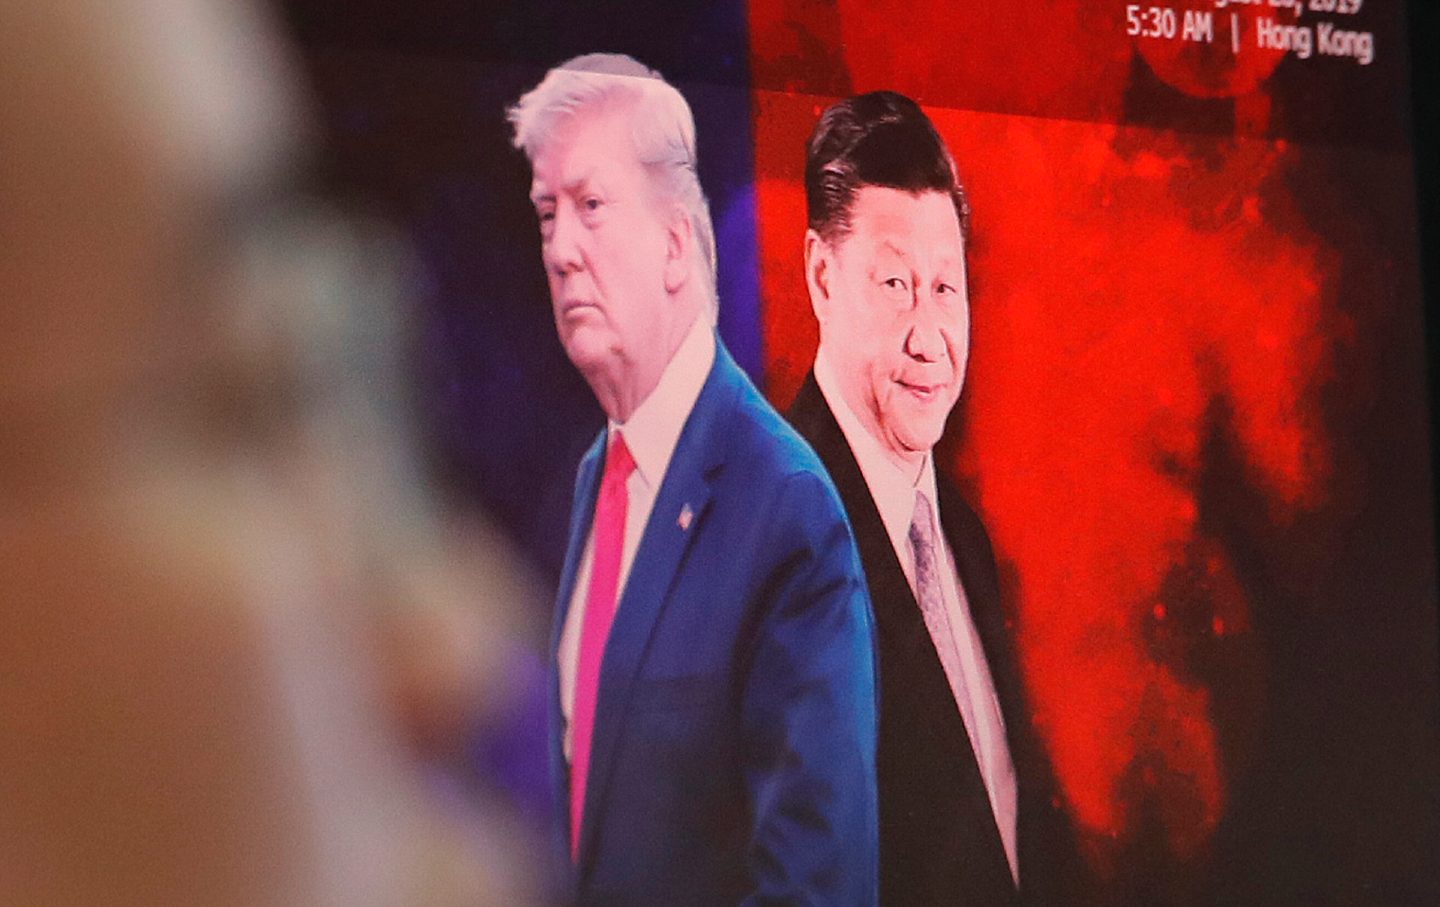 Chinese President Xi Jinping, right, and U.S. President Donald Trump